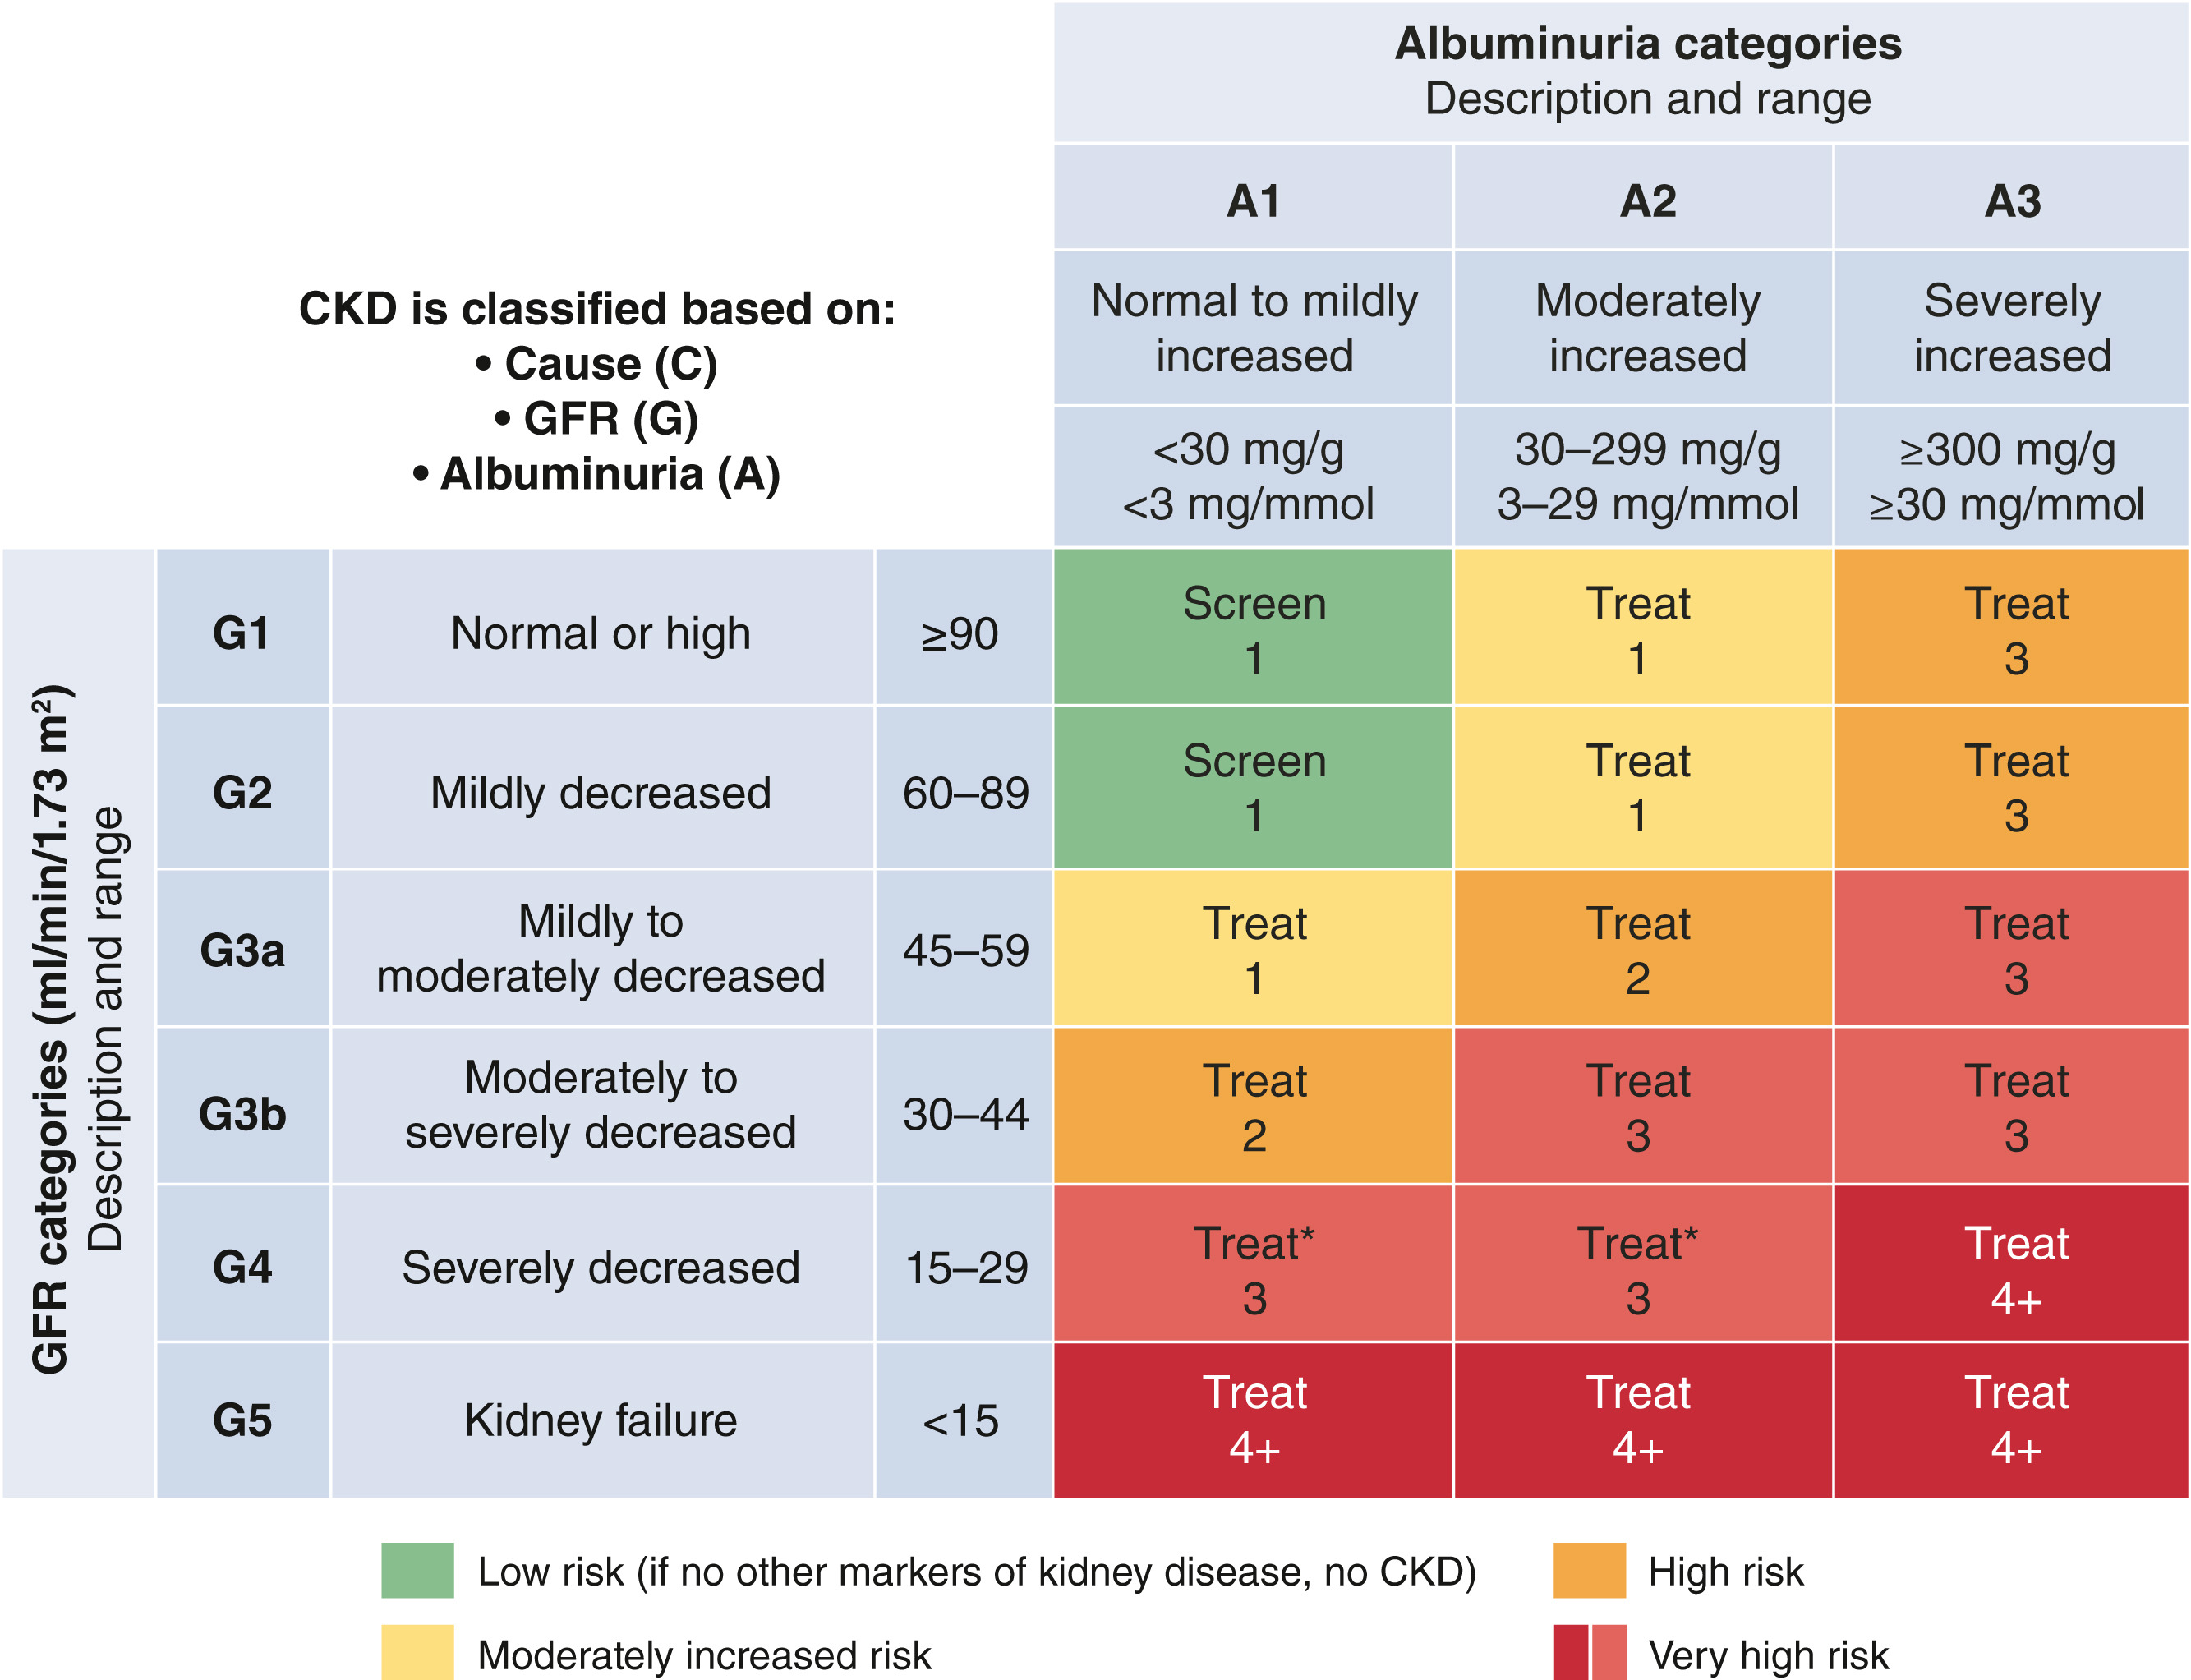 Frequency of monitoring GFR and uACR in people with CKD. Higher GFR and/or lower uACR are lower risk; lower GFR and/or higher uACR are higher risk.